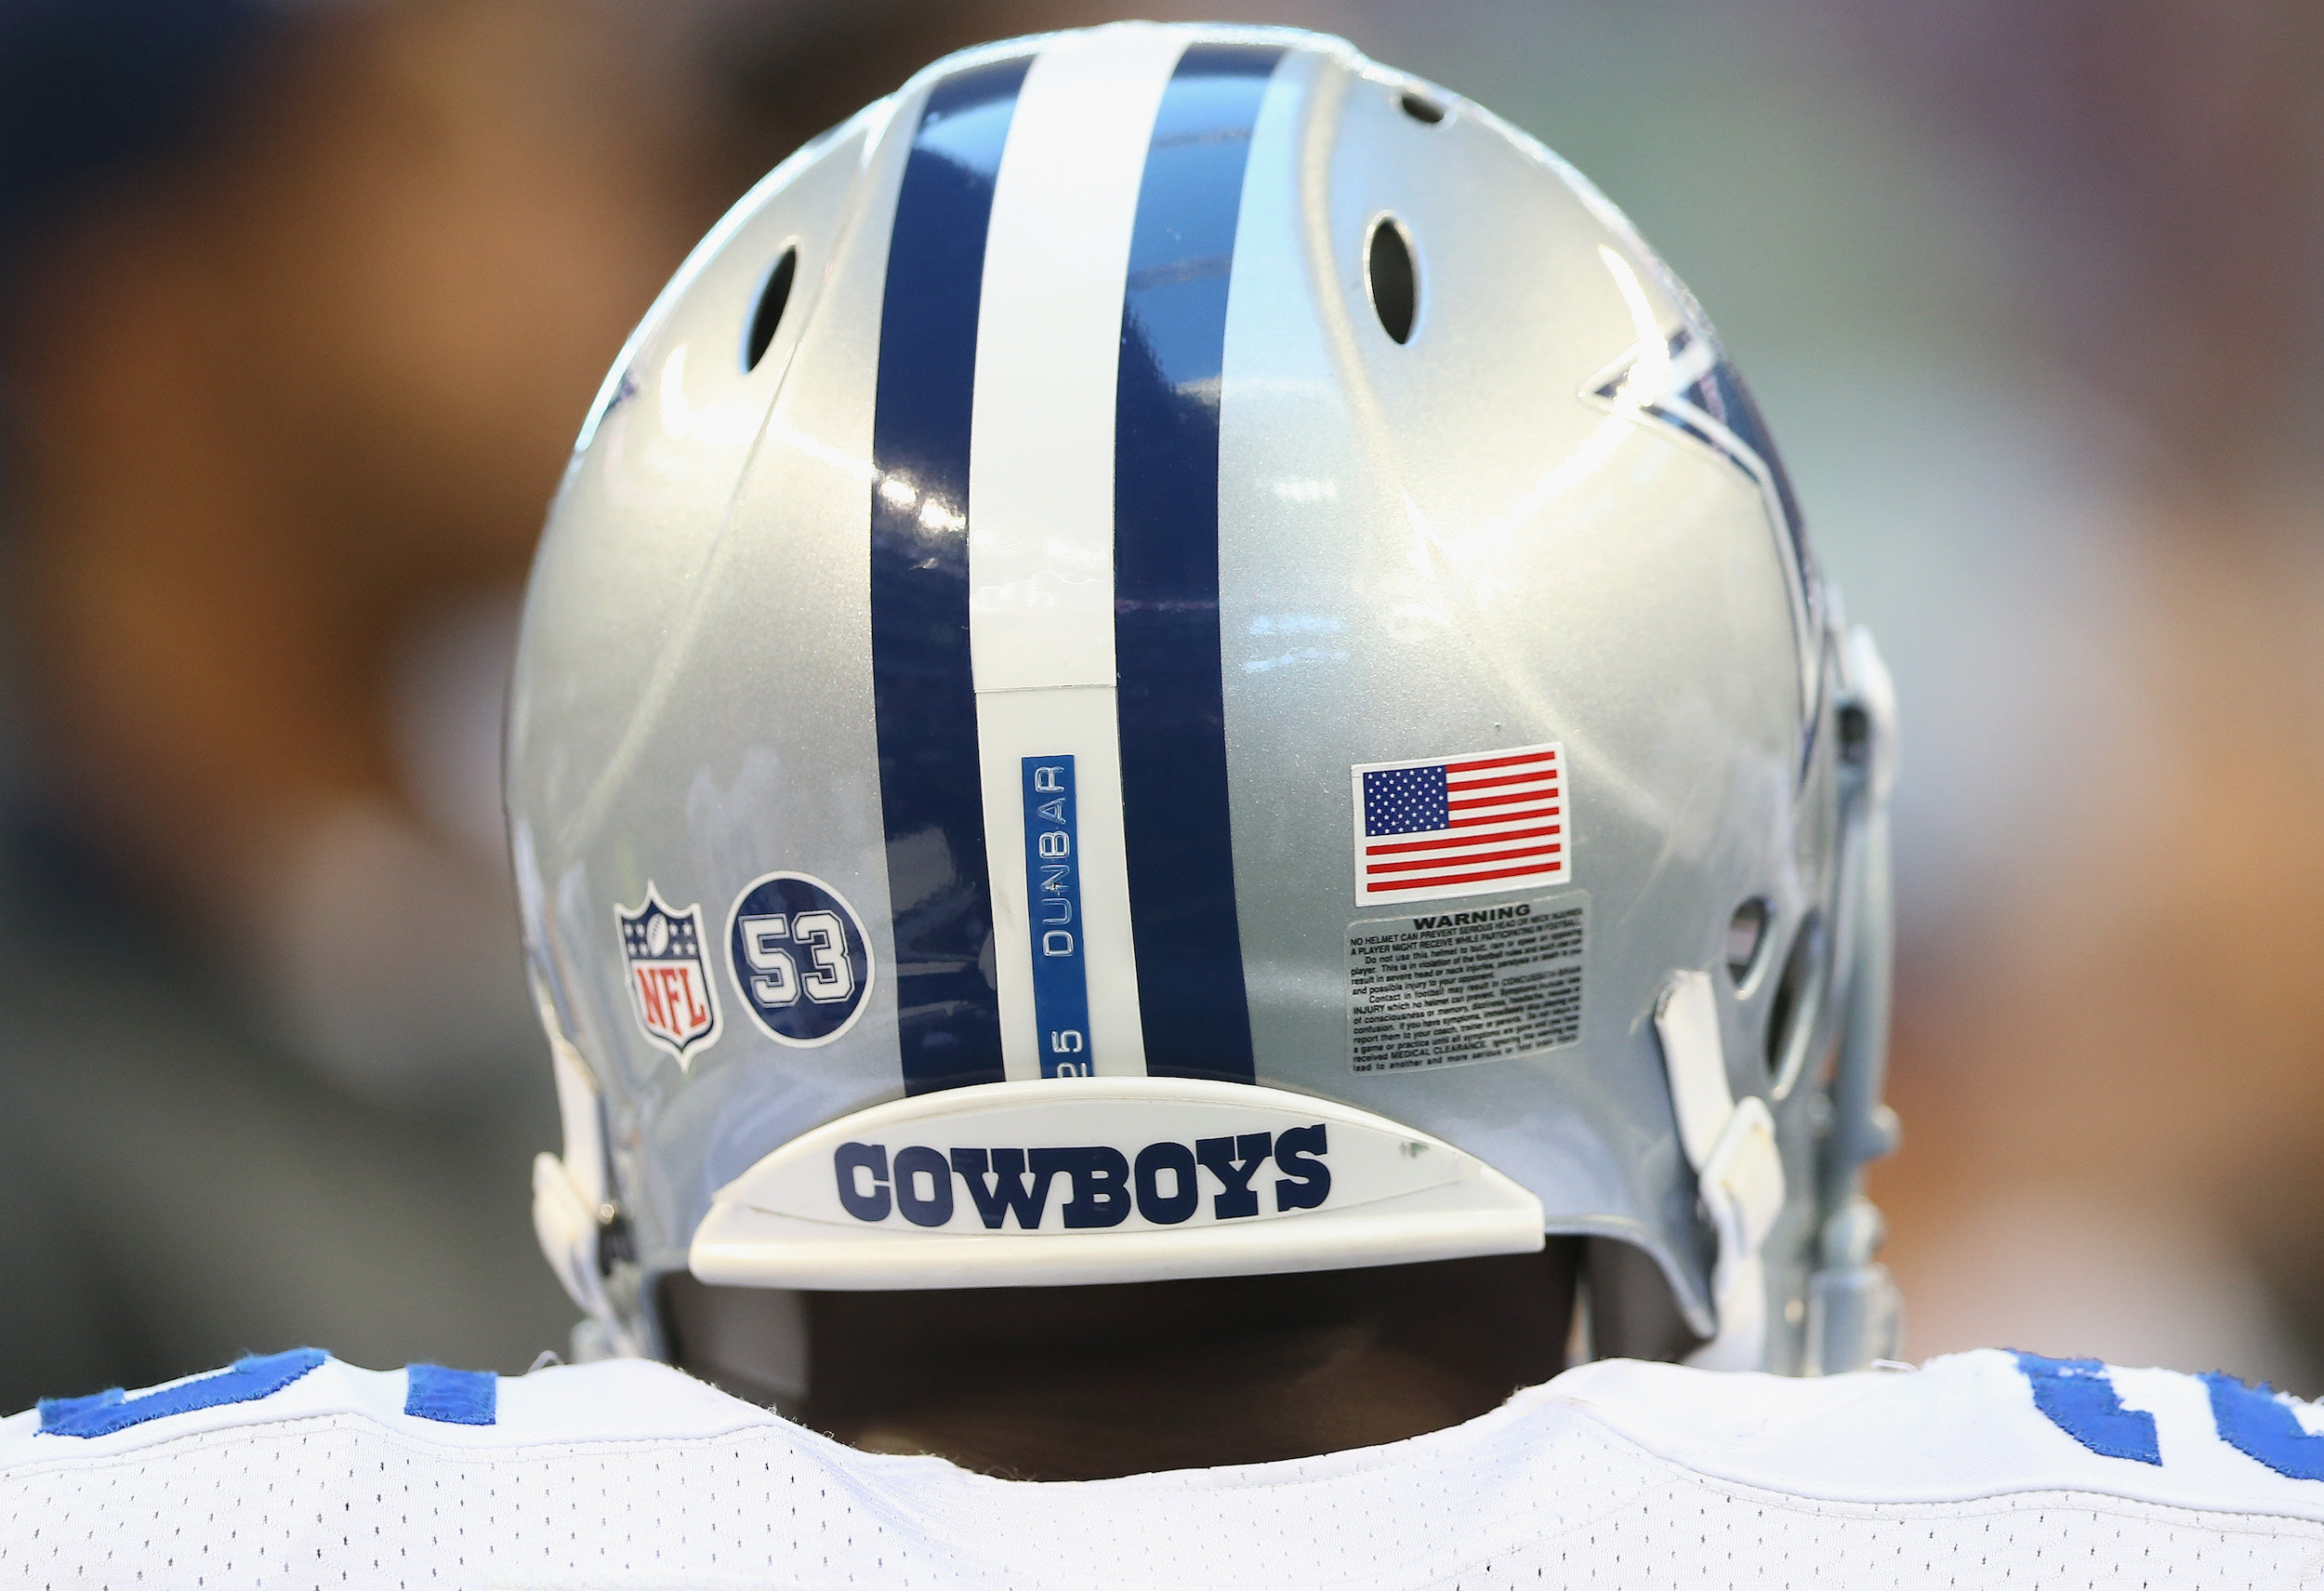 The Dallas Cowboys put 53 on their helmets, honoring the tragic death of Jerry Brown.